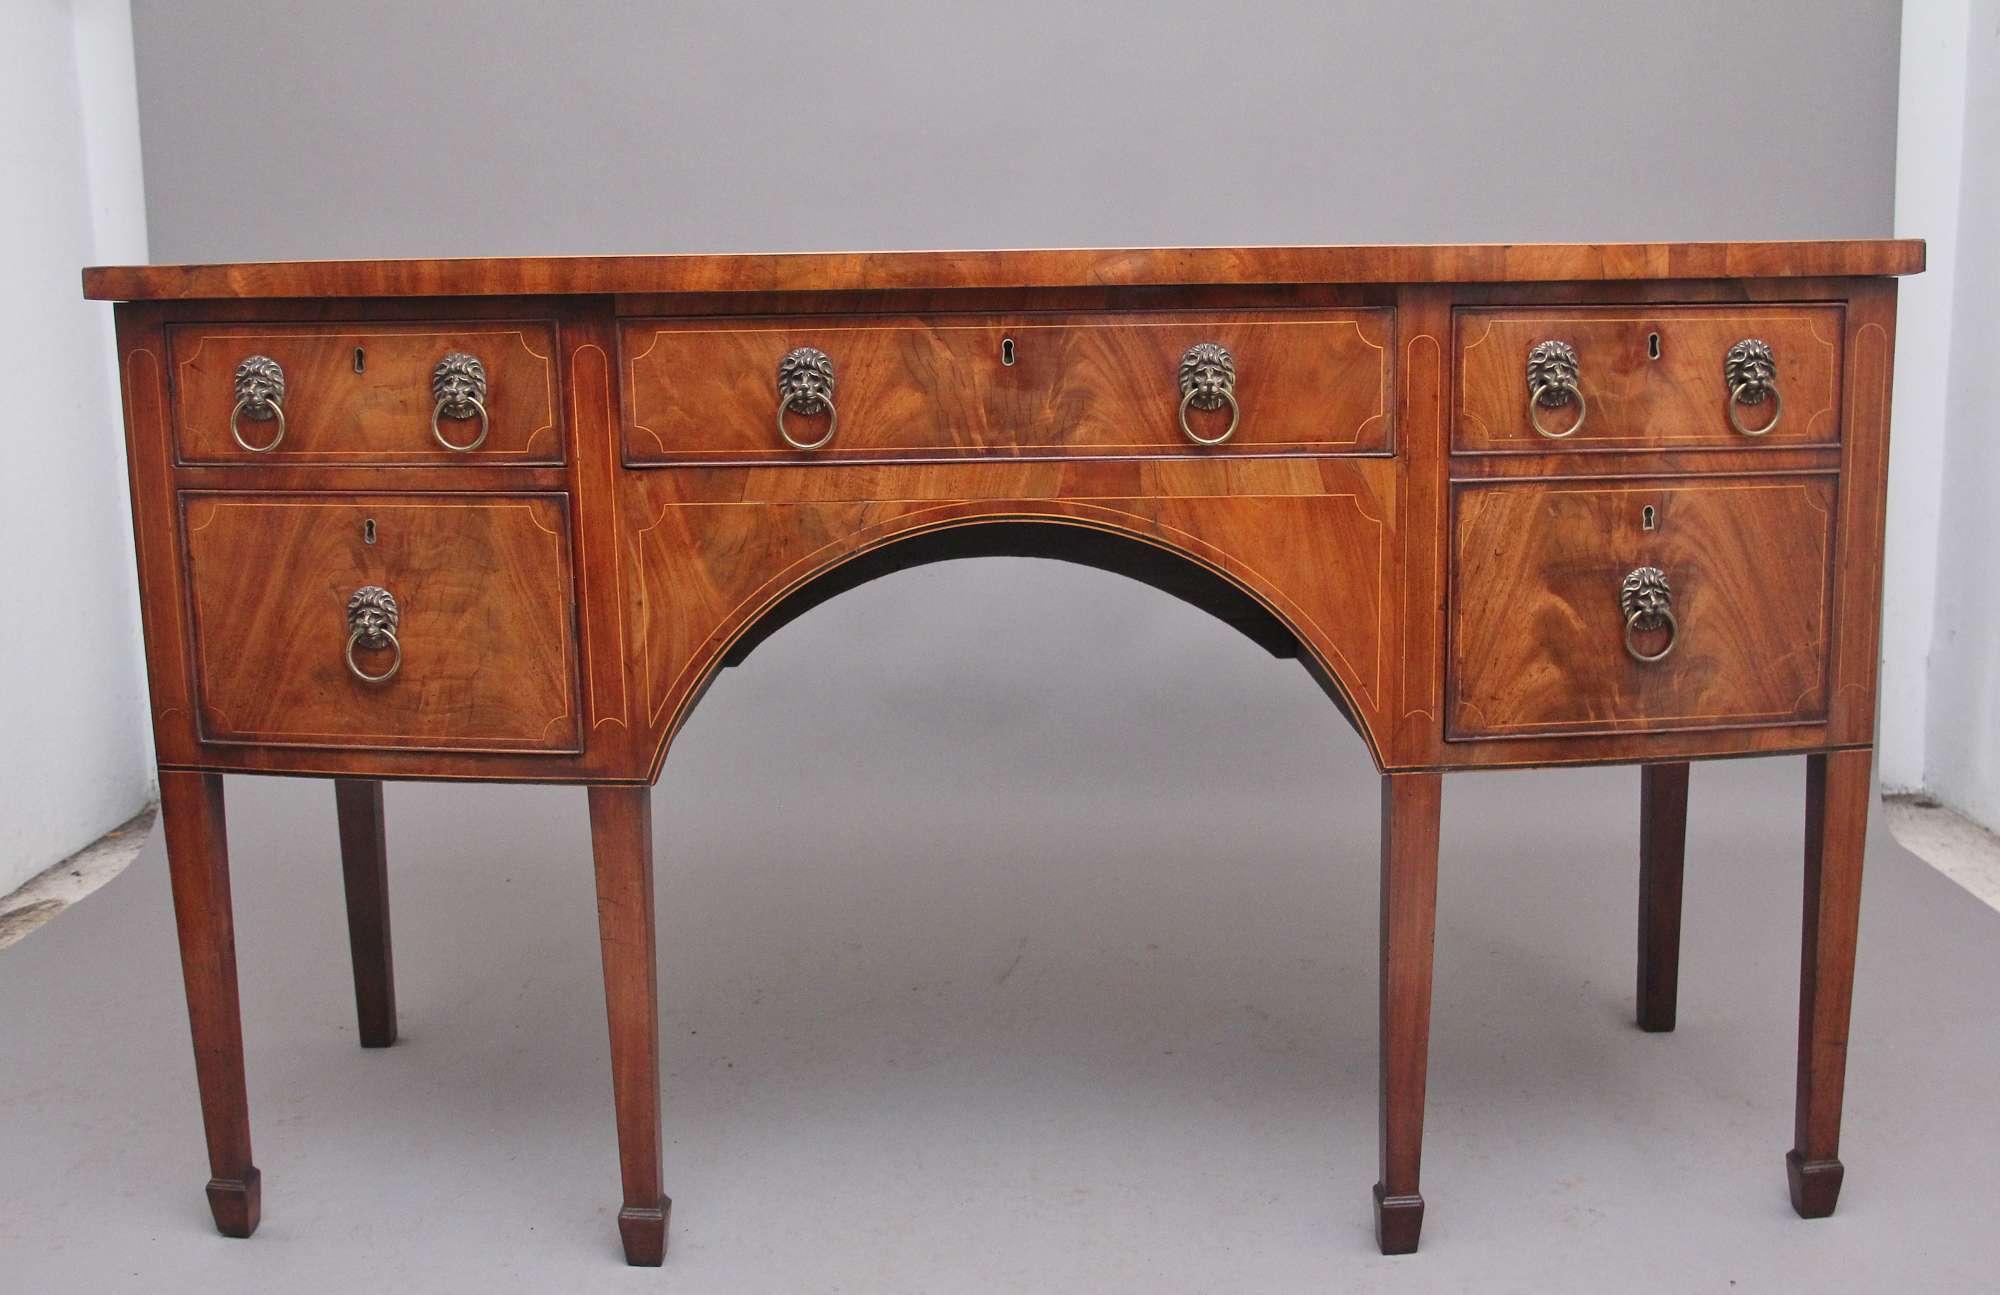 Early 19th Century Inlaid Mahogany Antique Sideboard